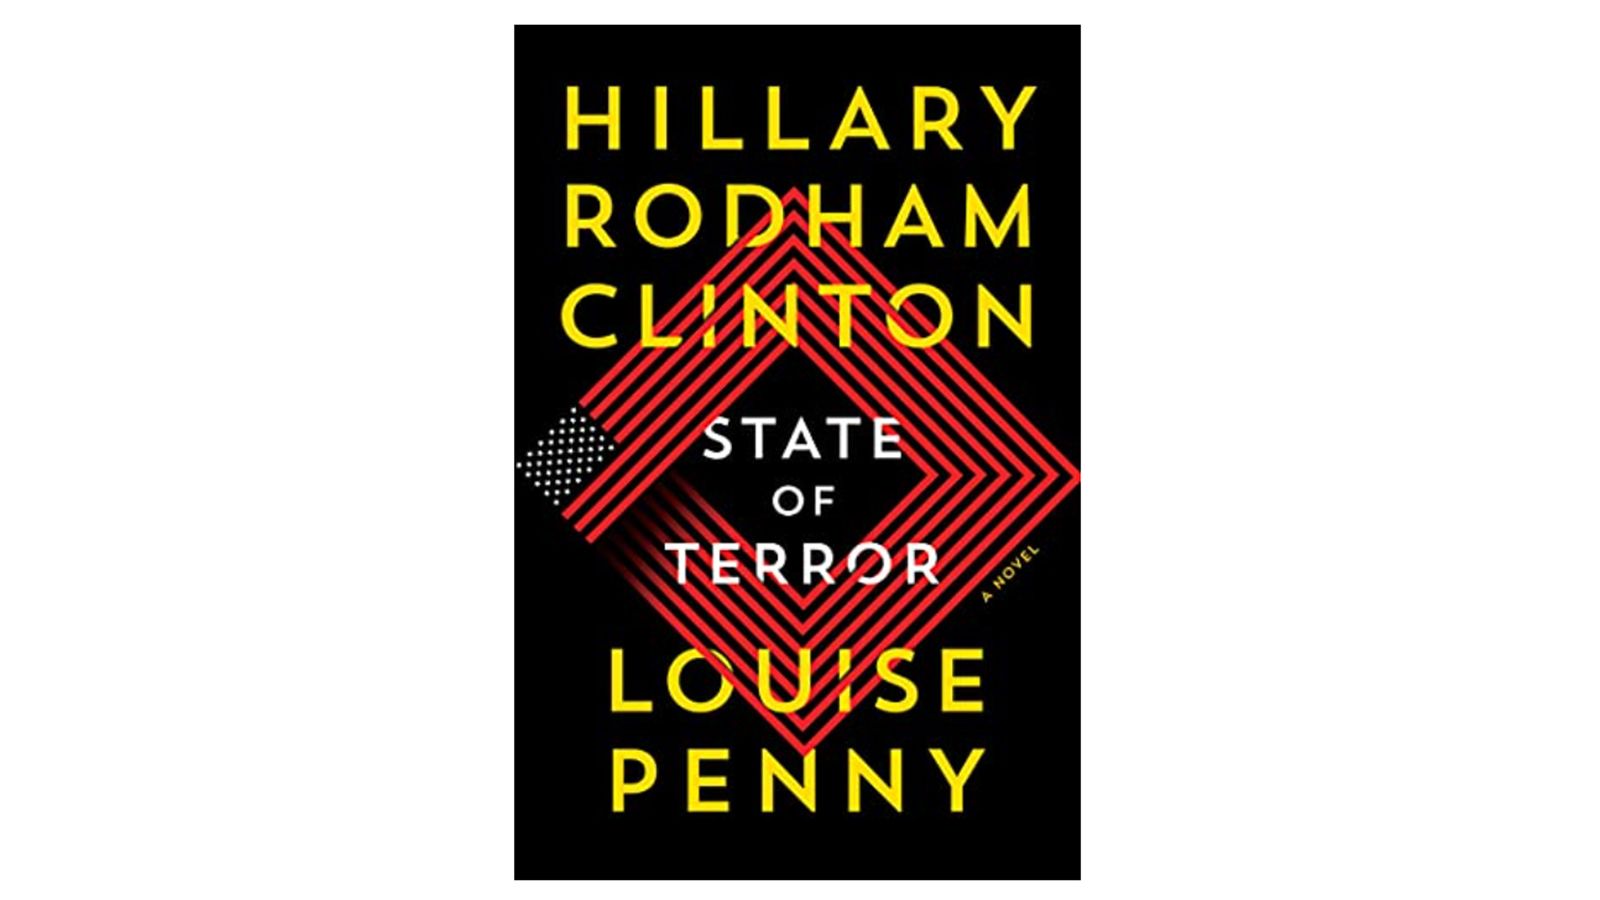 louise penny books